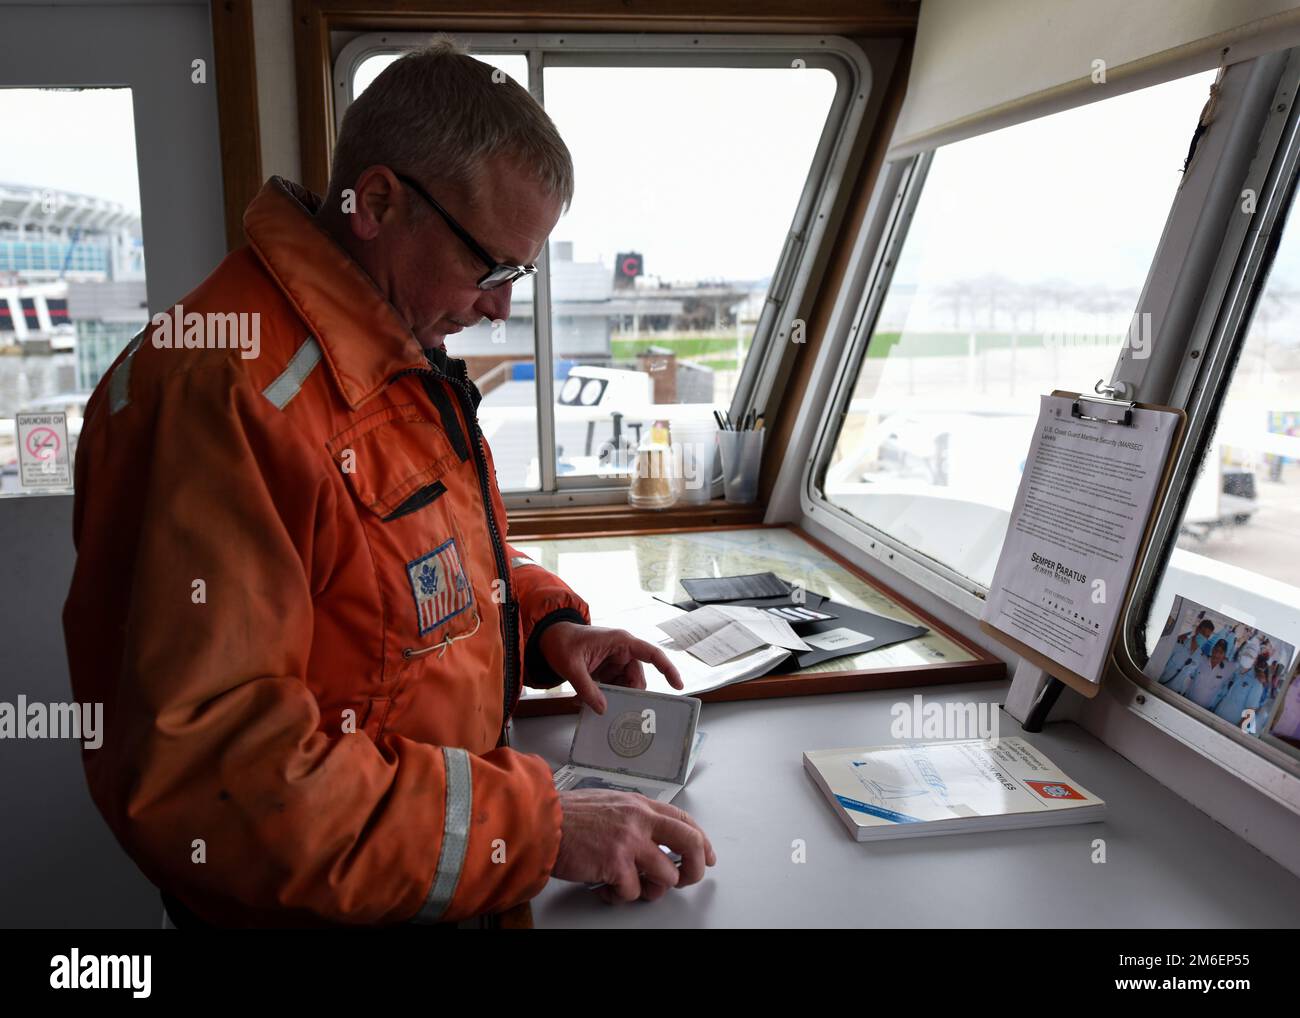 U.S. Coast Guard Chief Warrant Officer Robie Moorhouse, a marine inspector at Marine Safety Unit (MSU) Cleveland, inspects the captain’s license during a vessel inspection April 26, 2022, in Cleveland, Ohio. MSU Cleveland conducts vessel inspections to make sure vessels are in compliance safety, security, and environmental regulations. Stock Photo